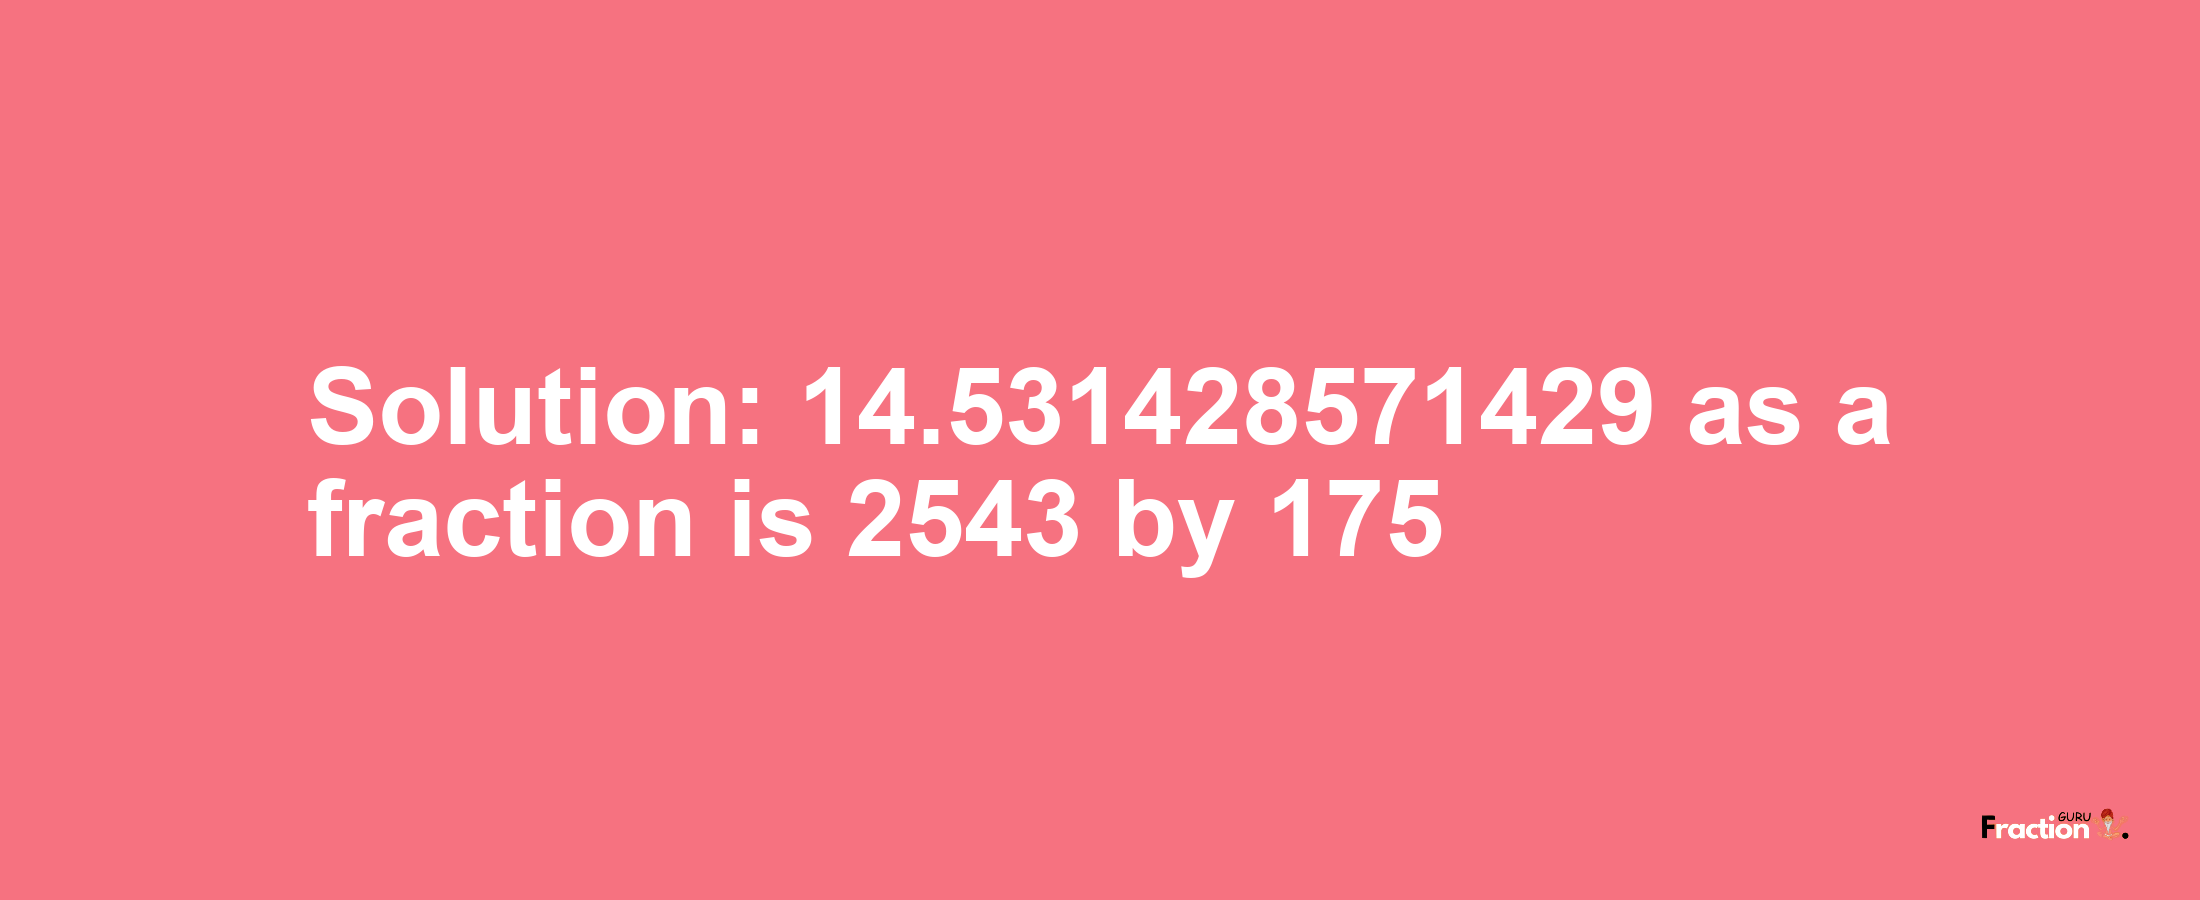 Solution:14.531428571429 as a fraction is 2543/175